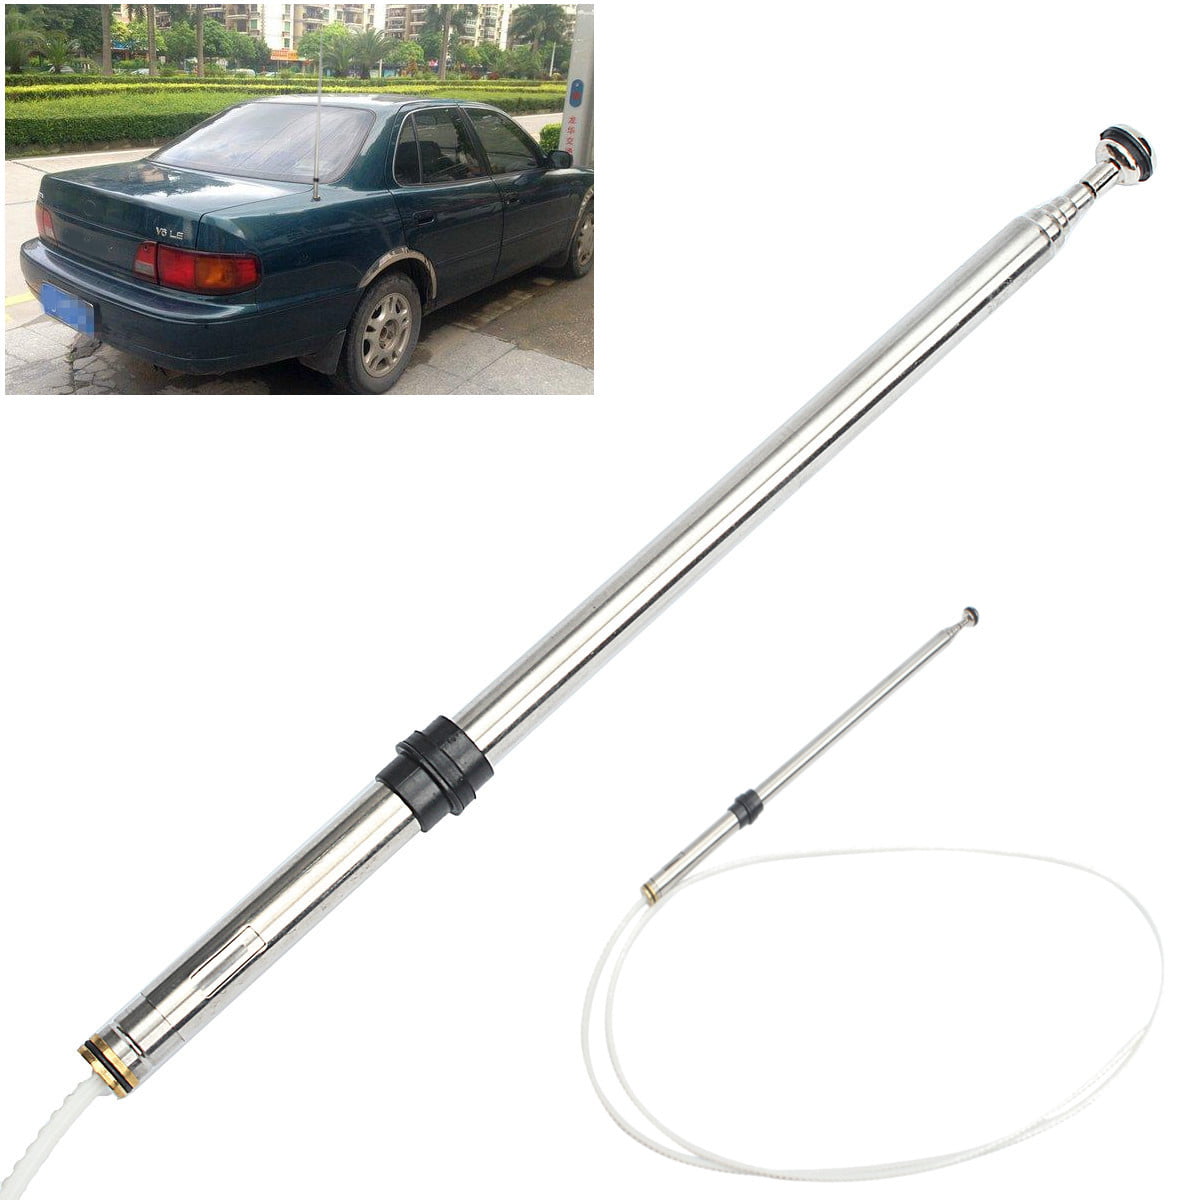 *BRAND NEW* MANUAL ANTENNA Mast Fits 1992-2001 Toyota CAMRY A111